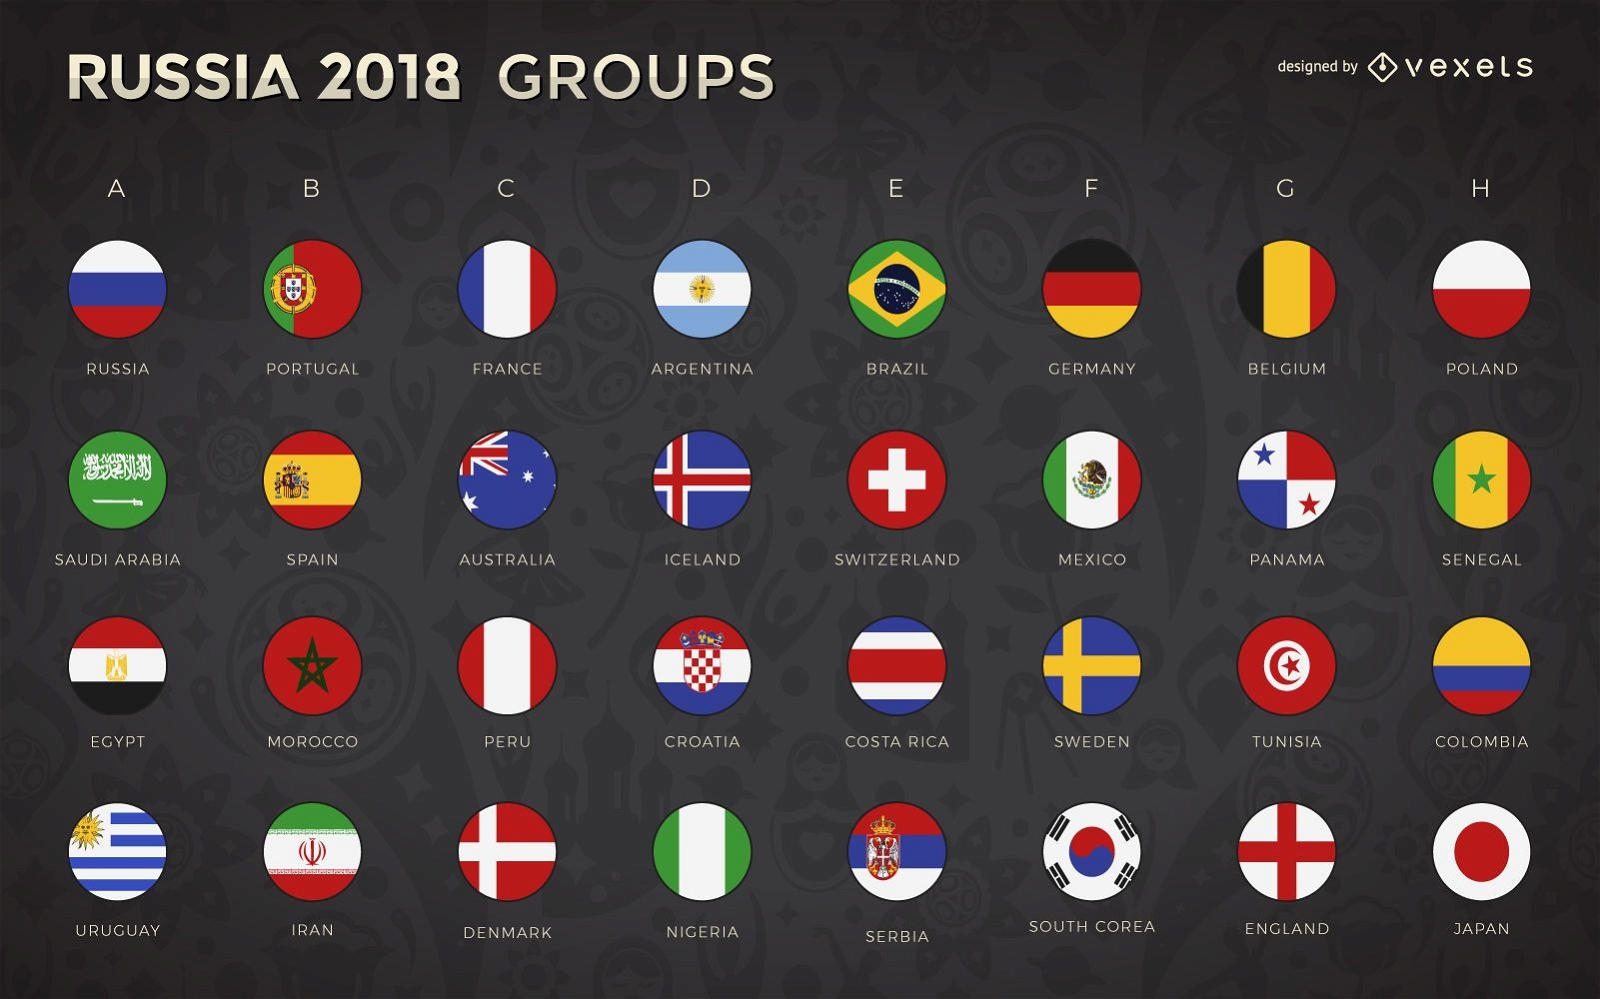 Russia 2018 World Cup groups and flags